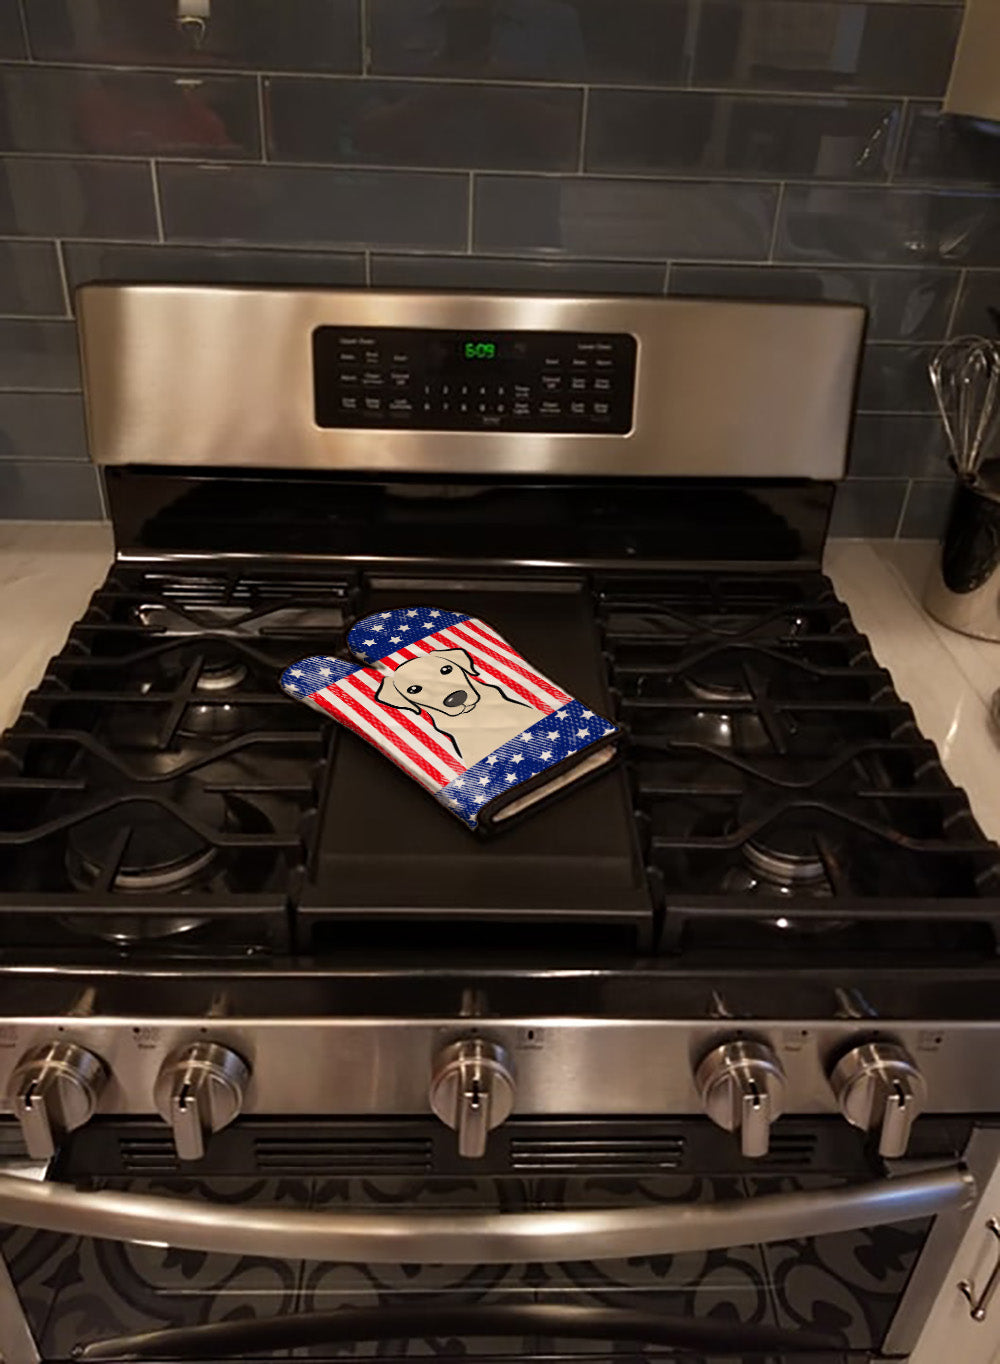 American Flag and Yellow Labrador Oven Mitt BB2152OVMT  the-store.com.